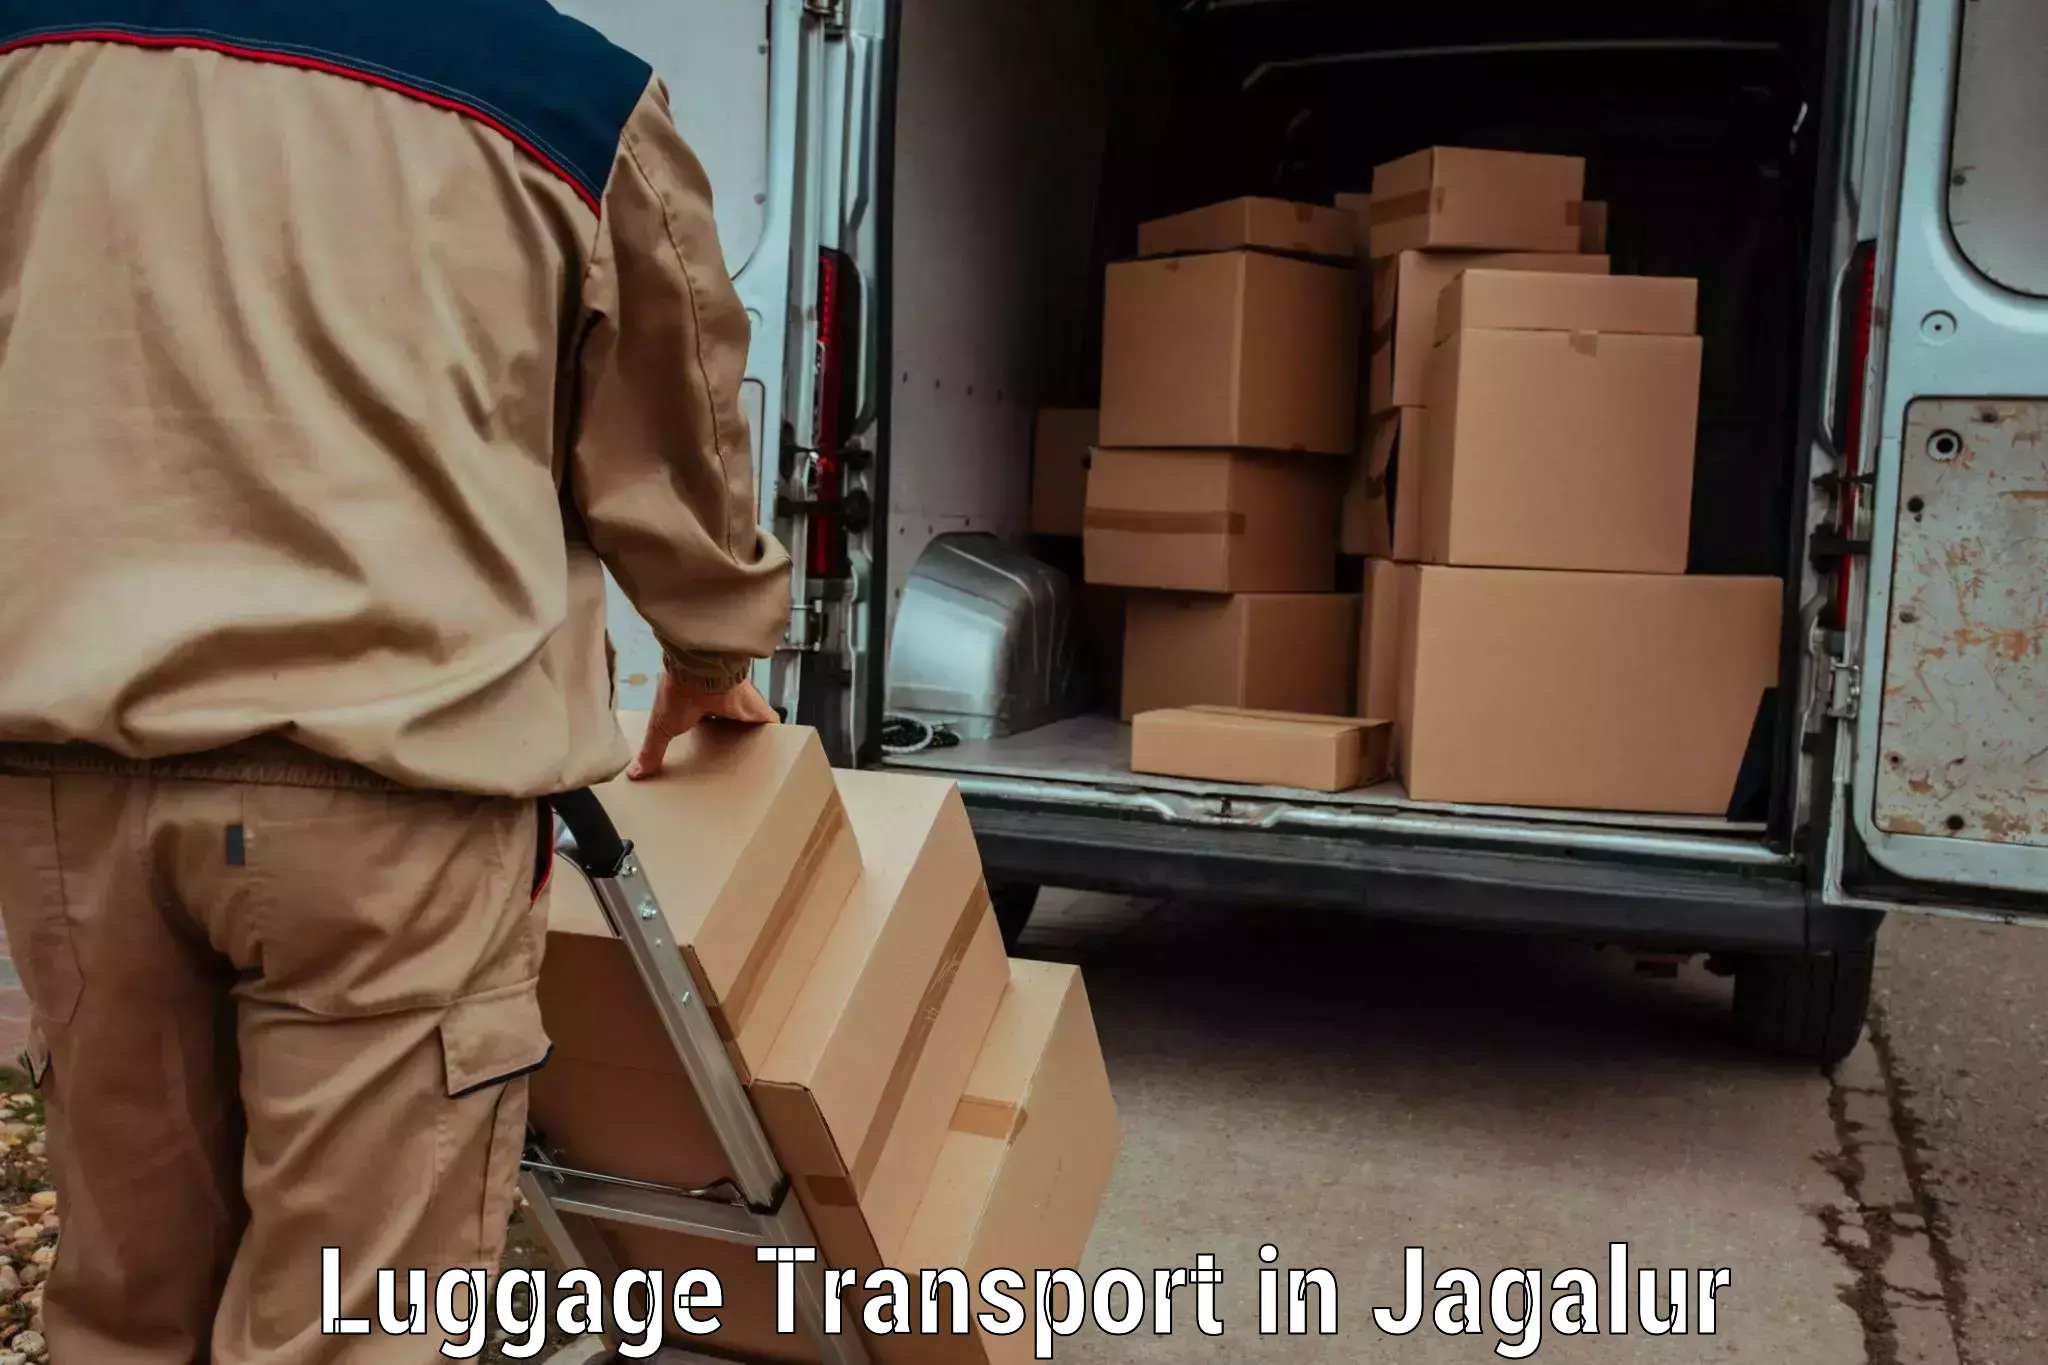 Instant baggage transport quote in Jagalur